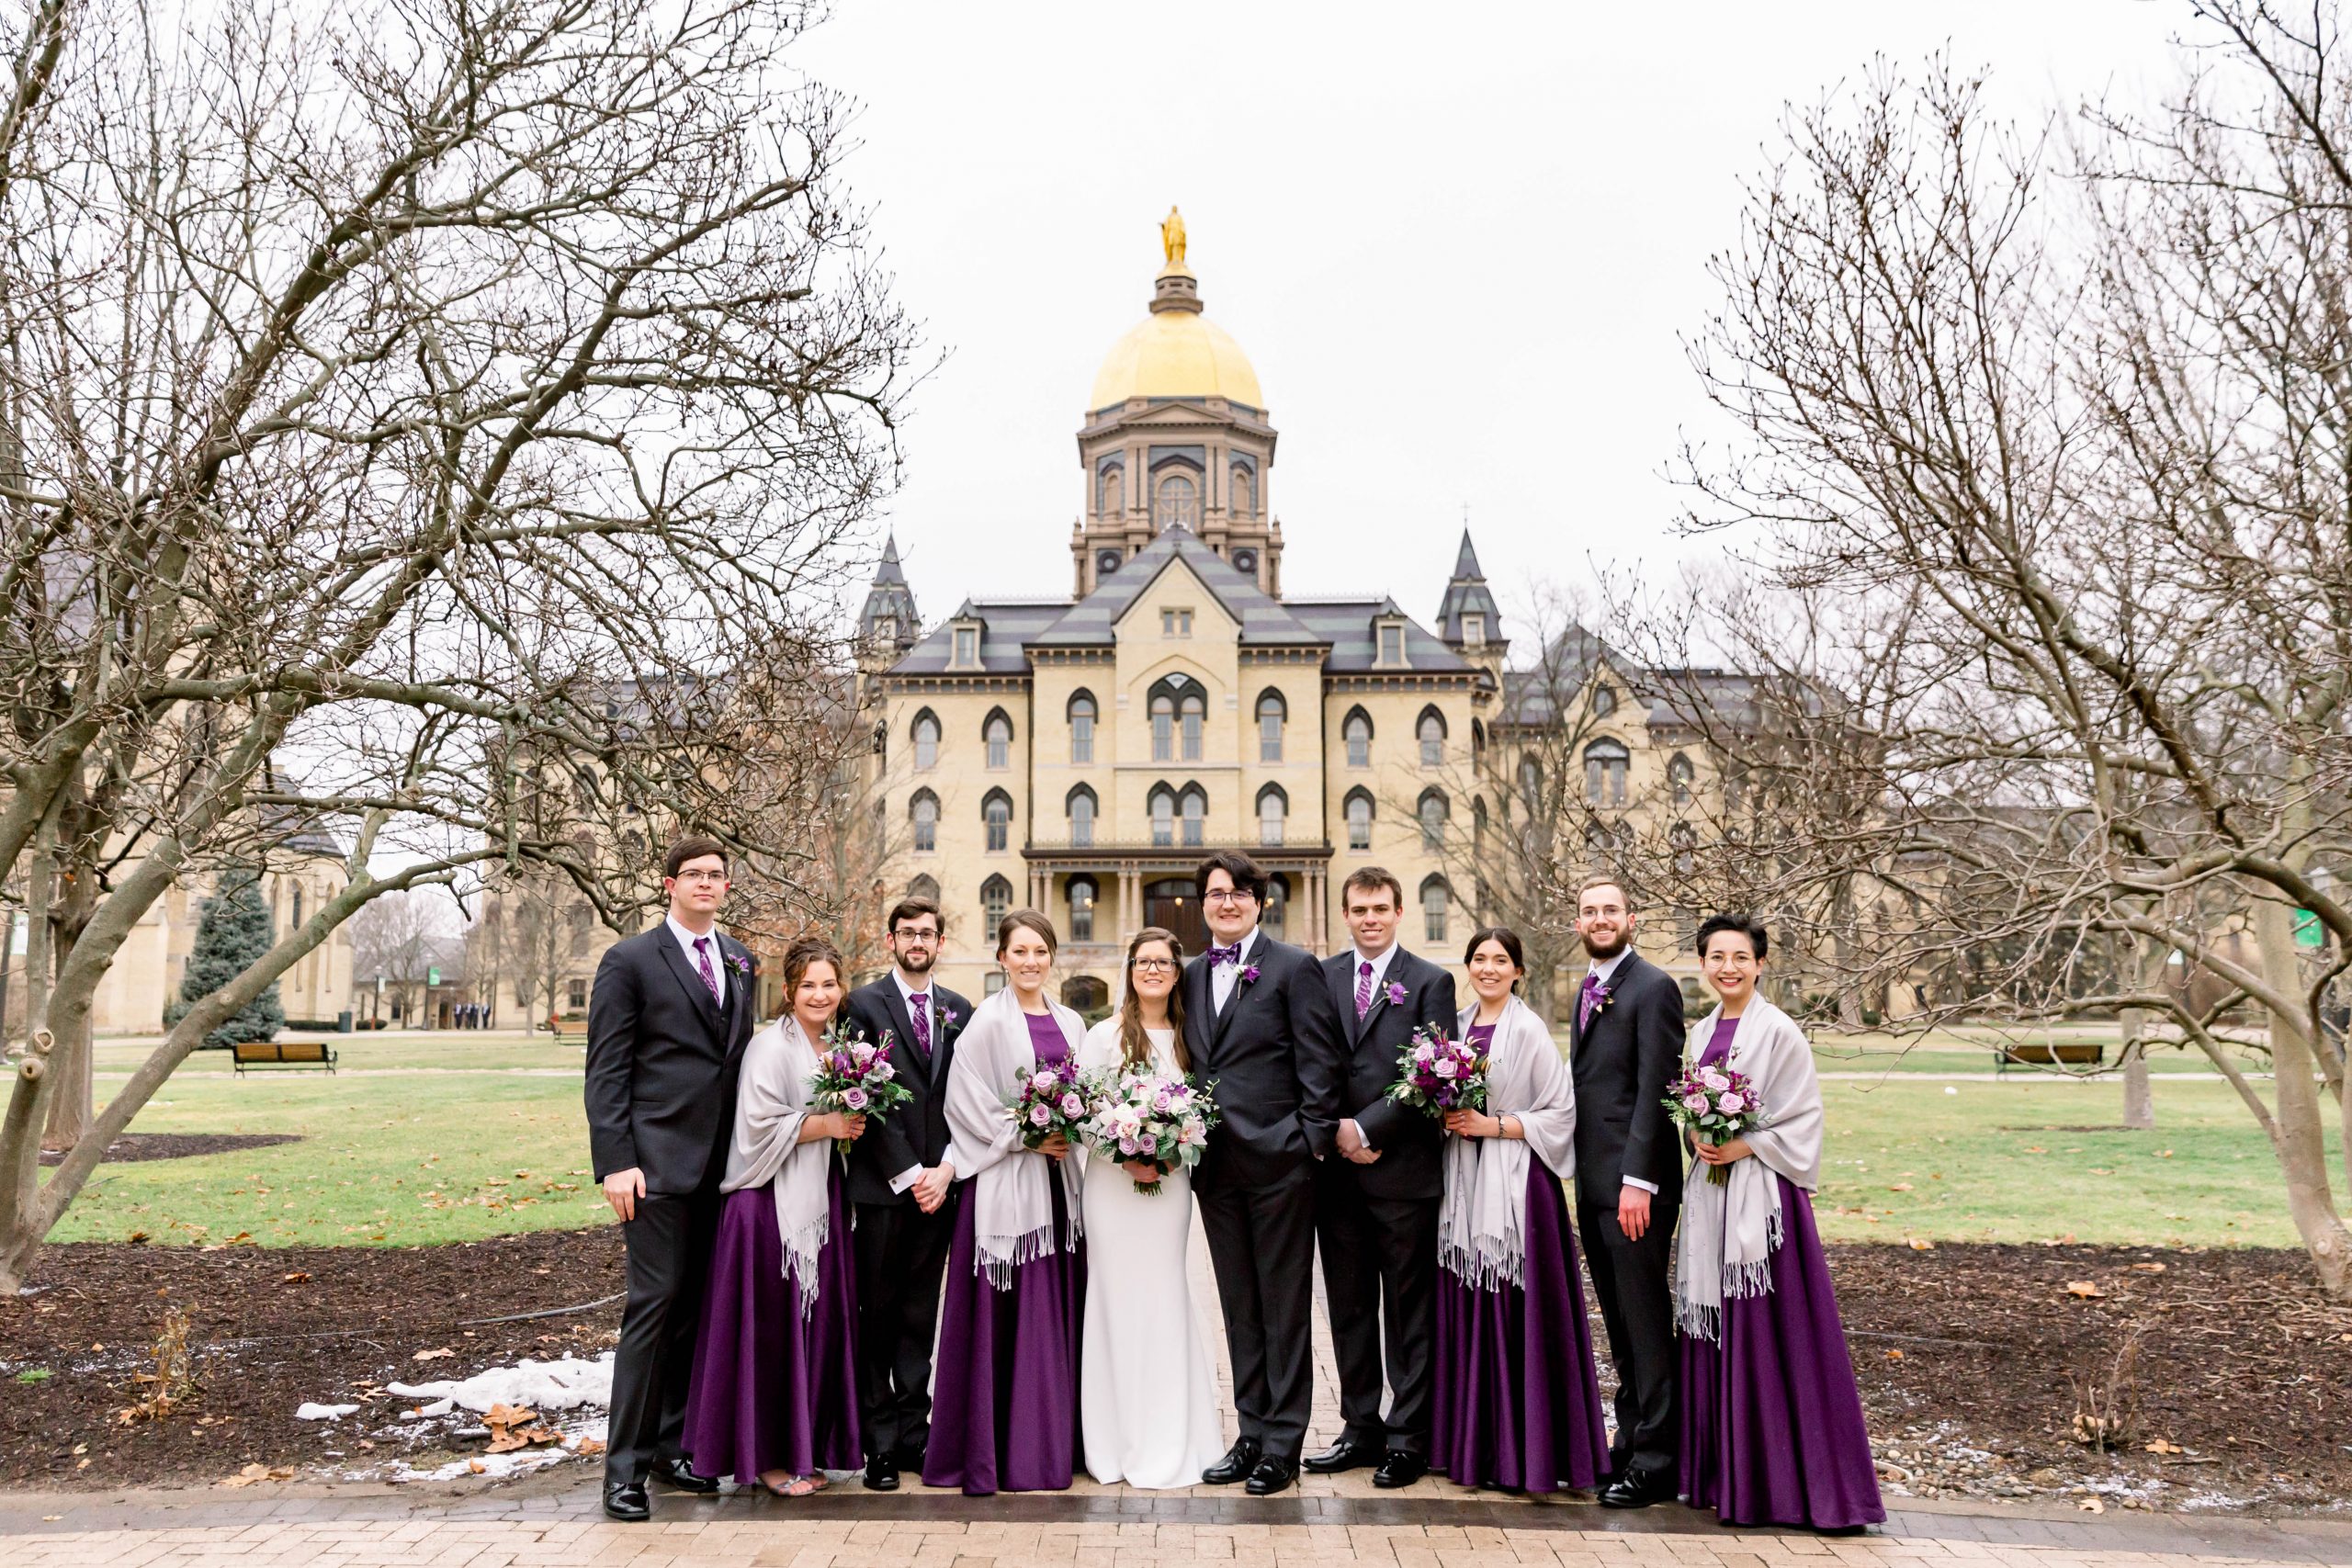 Wedding party standing in front of Notre Dame's main building smiling in long purple dresses and dark gray suits.